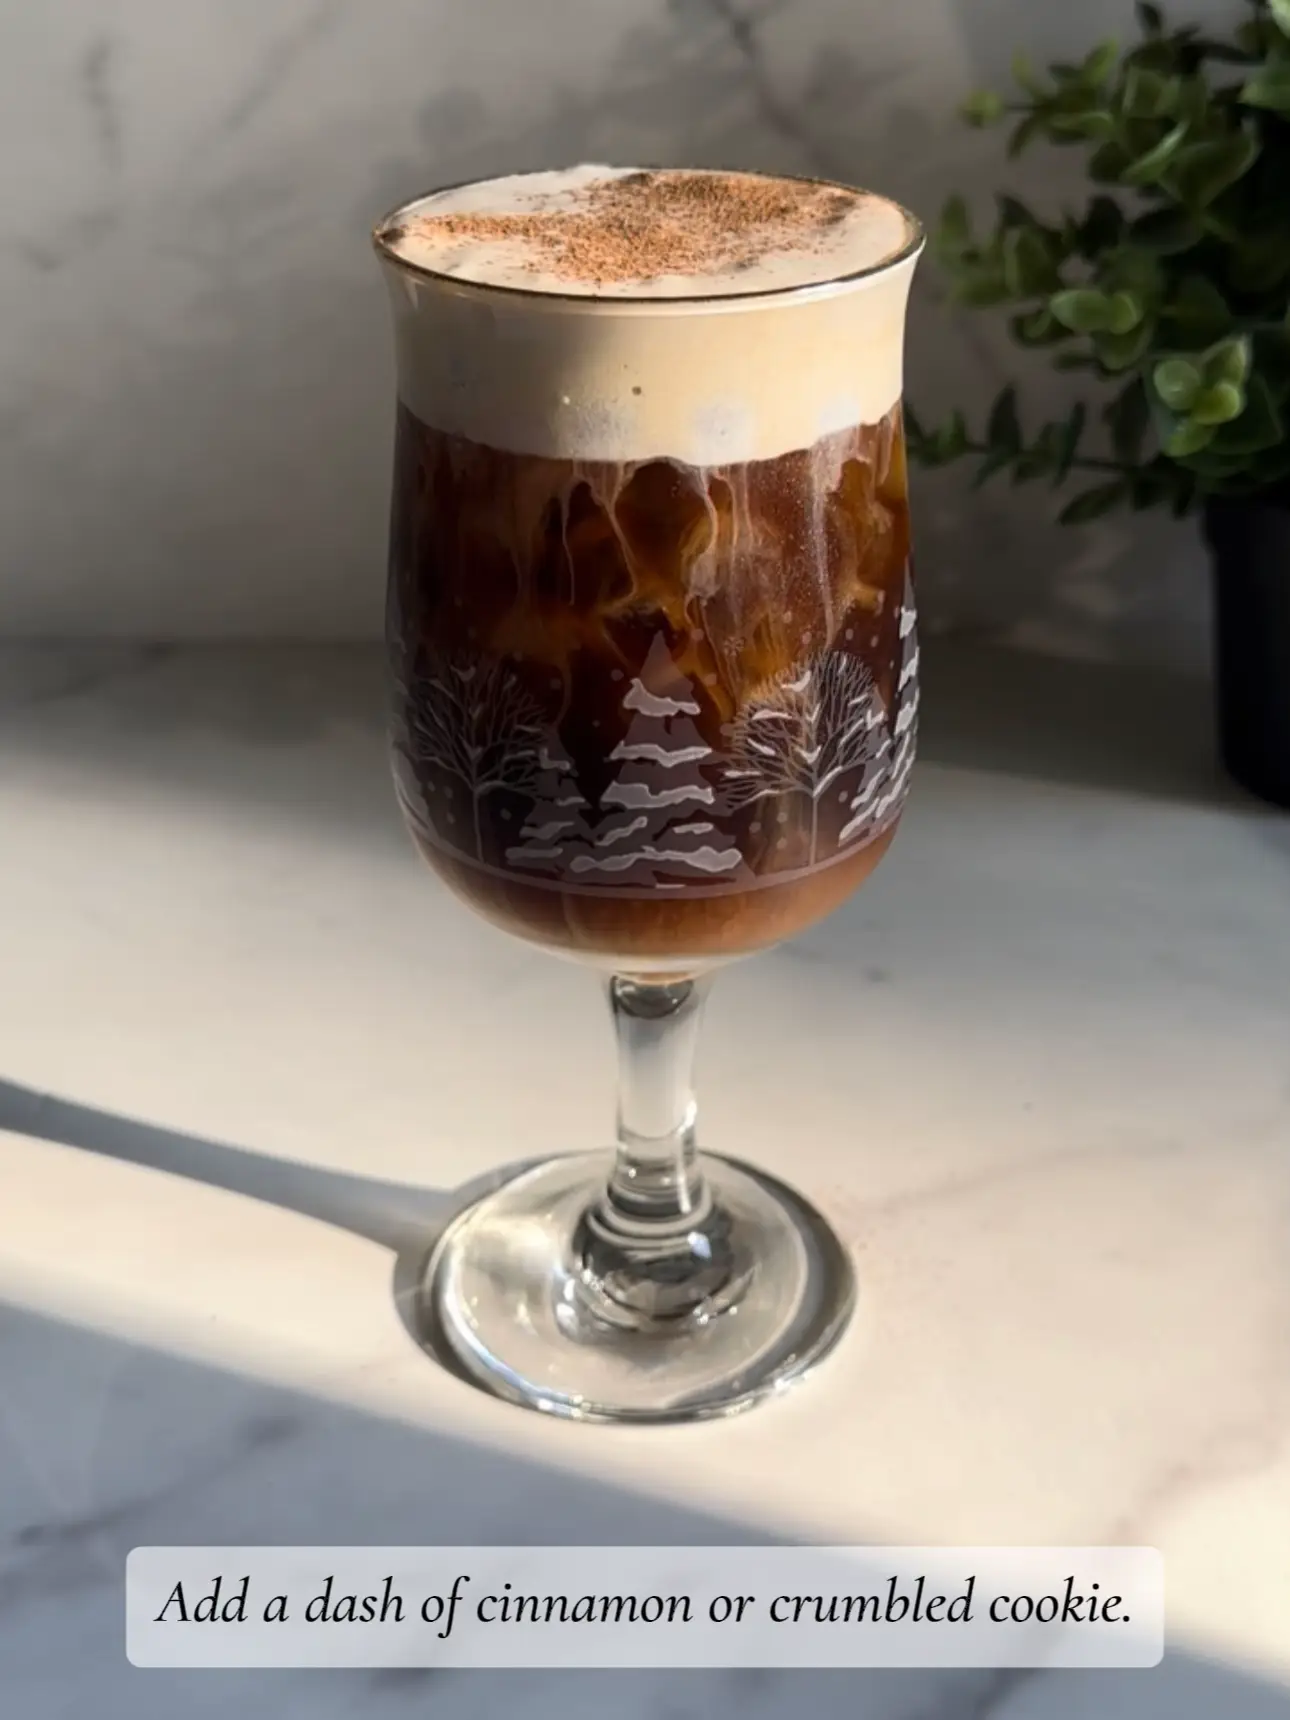  A glass of coffee with a cinnamon or crumbled cookie on top.